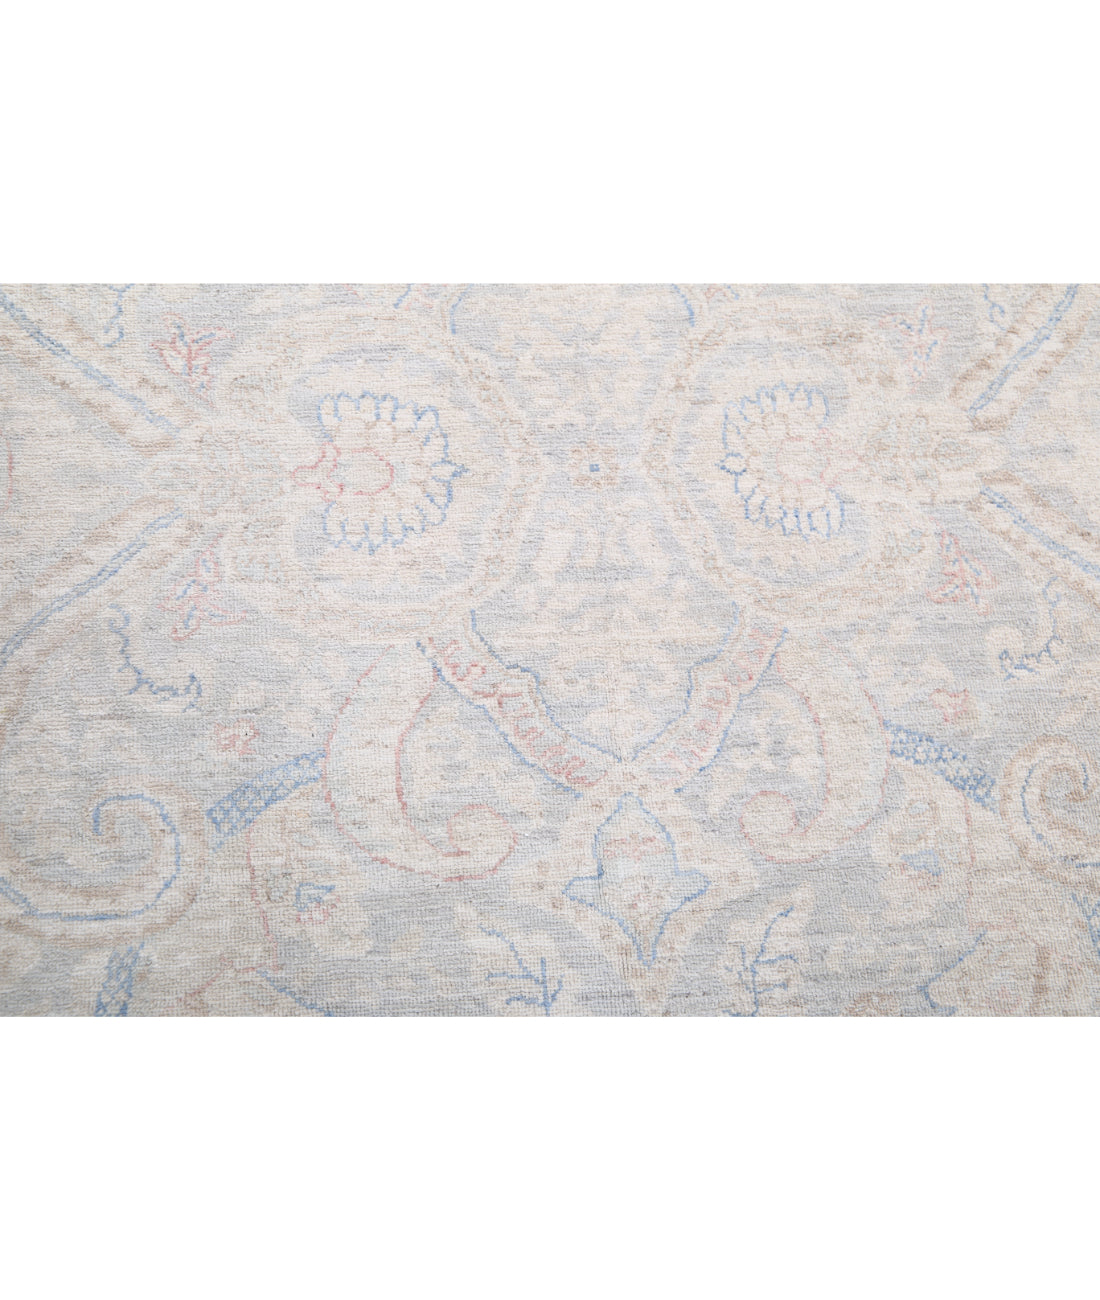 Hand Knotted Artemix Wool Rug - 6'1'' x 8'4'' 6'1'' x 8'4'' (183 X 250) / Grey / Blue